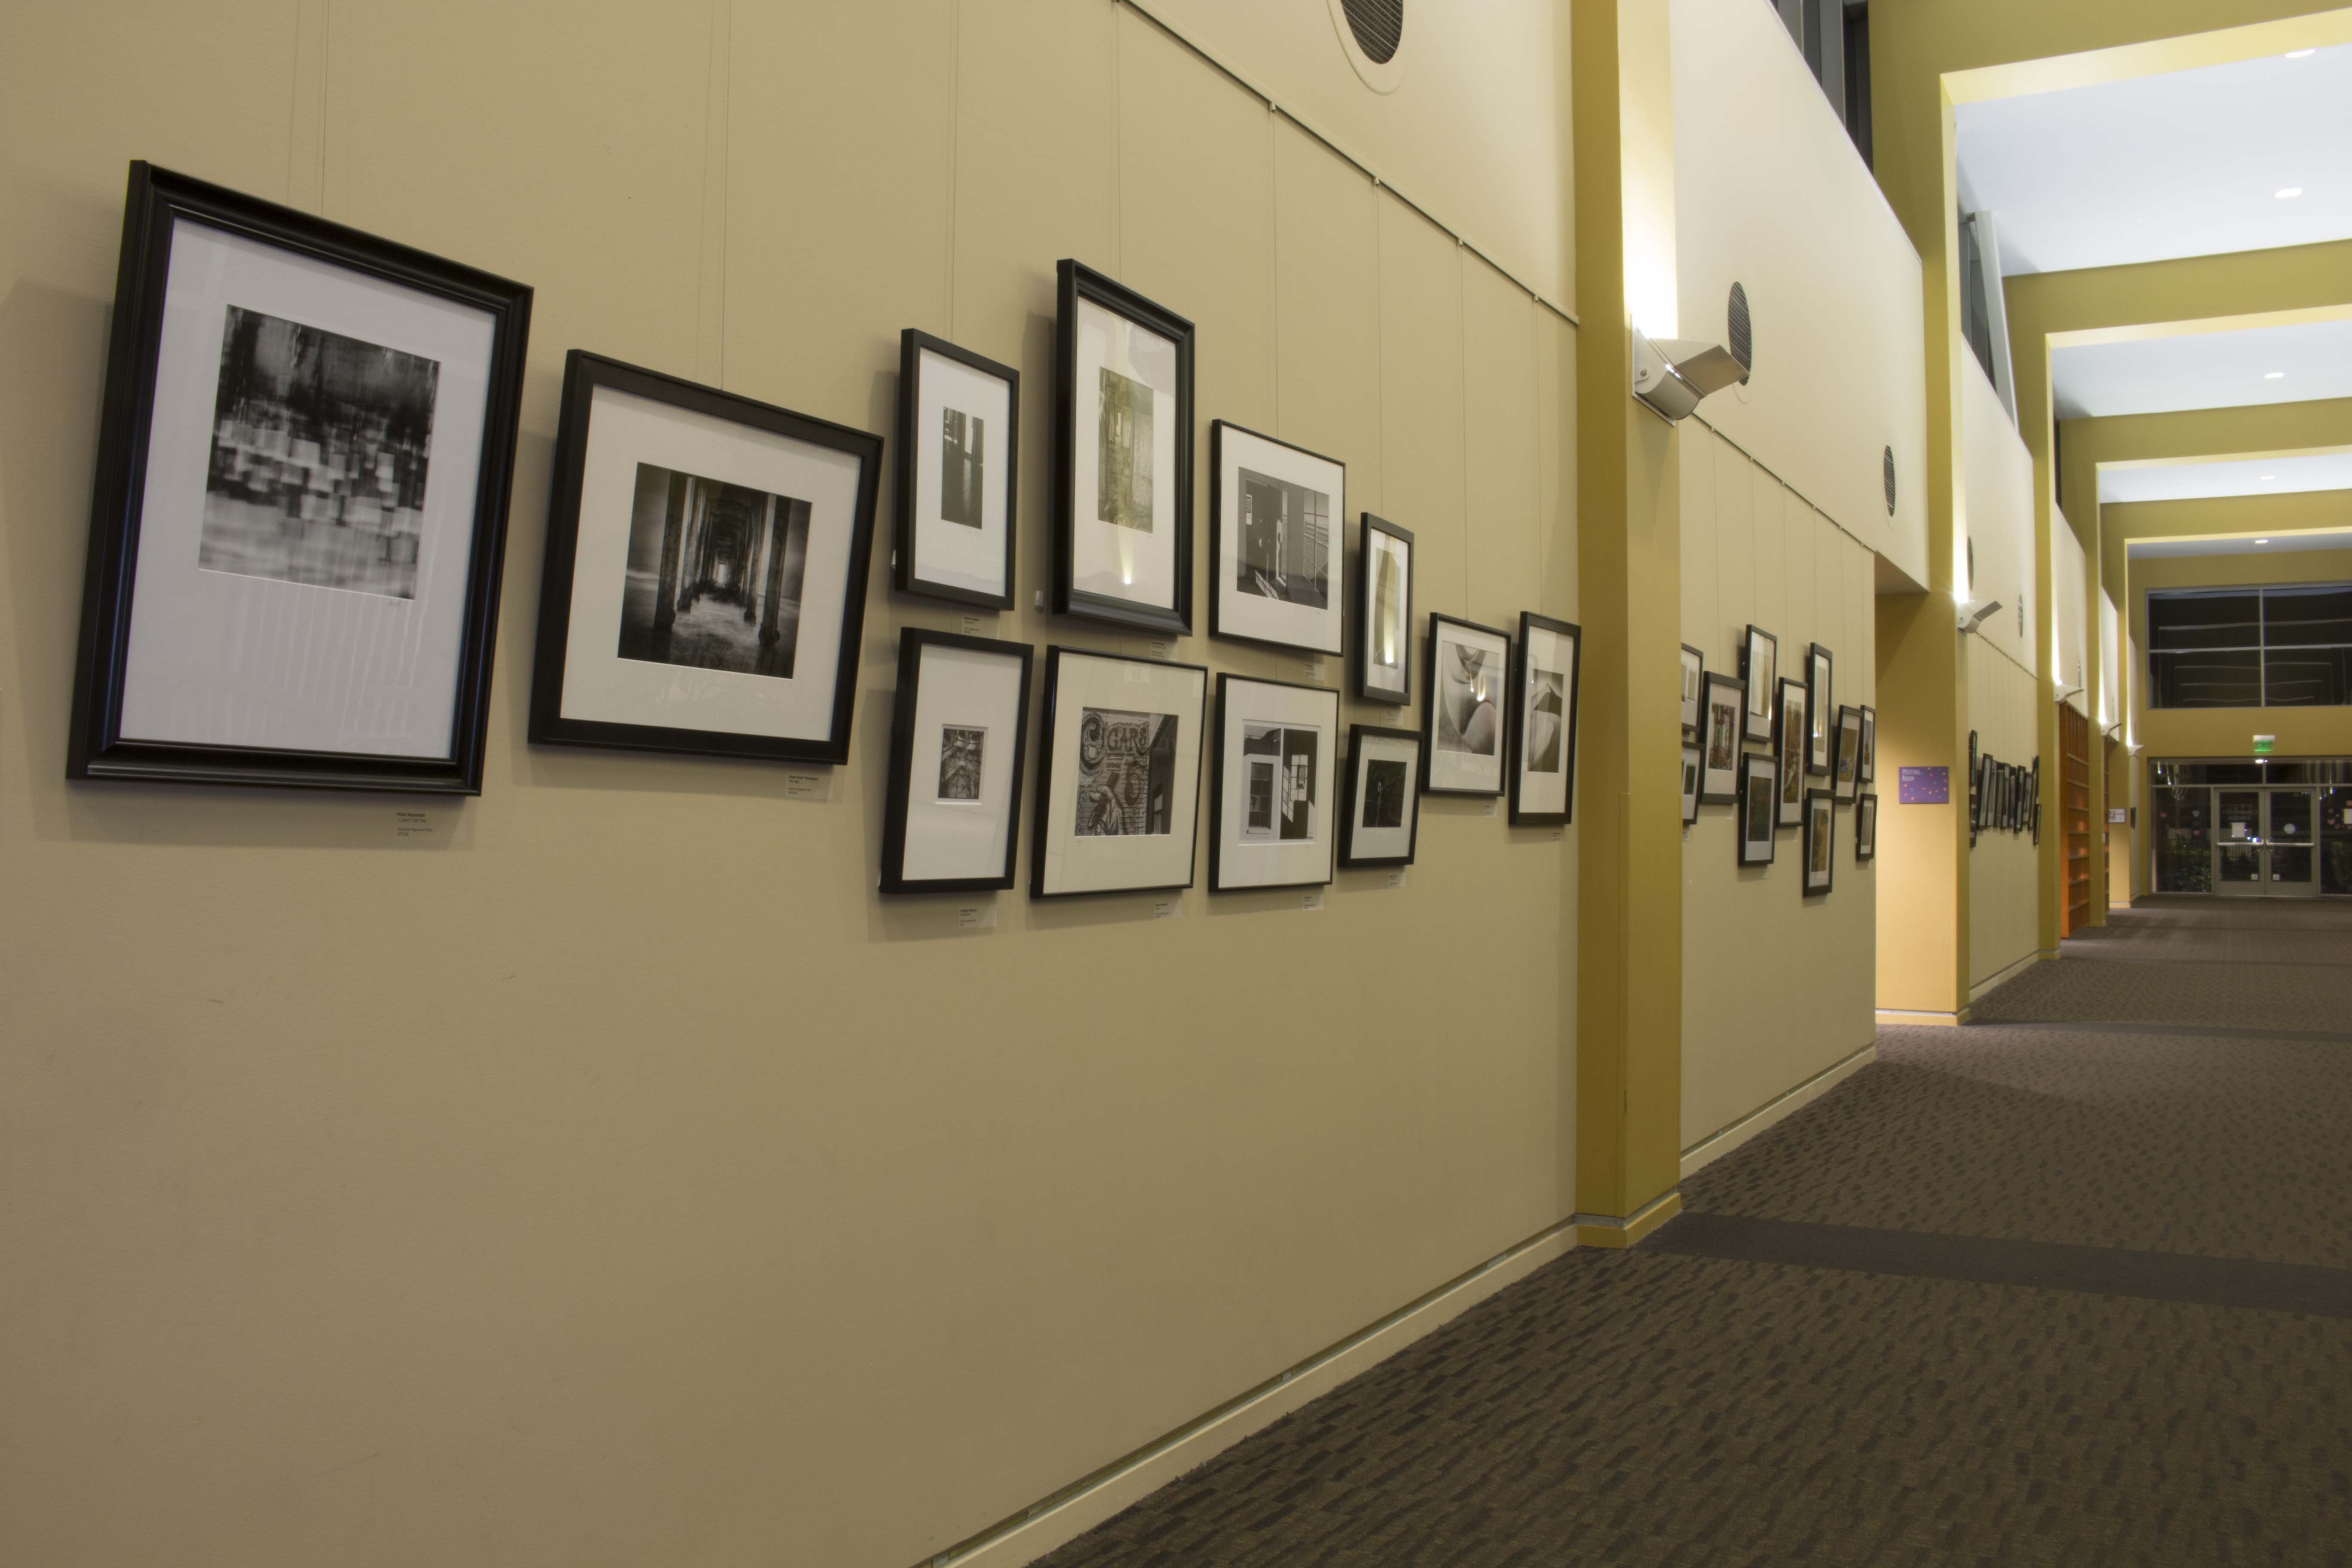 Photos are displayed for sell at the San Marcos Civic Center. February 8 2015 Photo credit: Belen Ladd